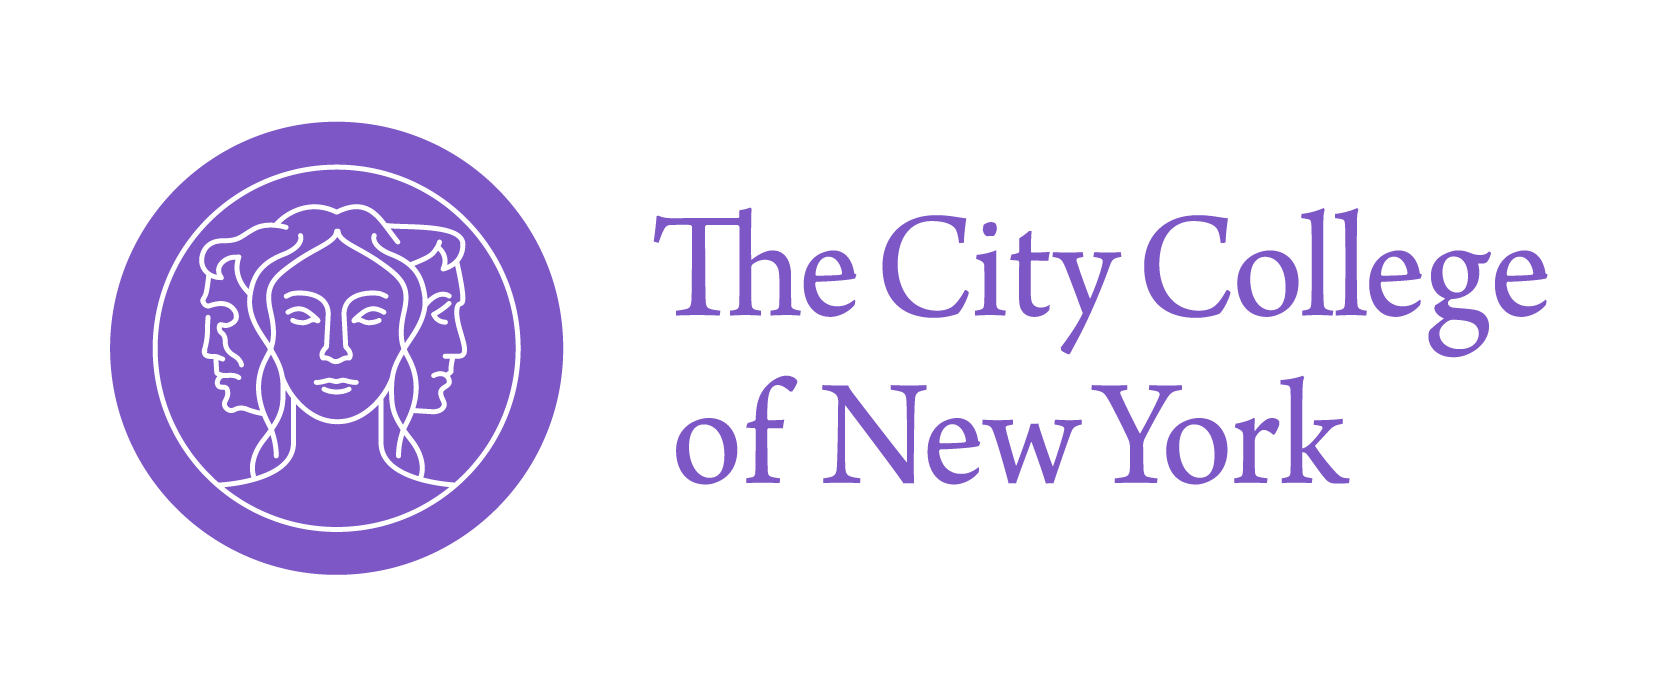 Logos and Branding The City College of New York